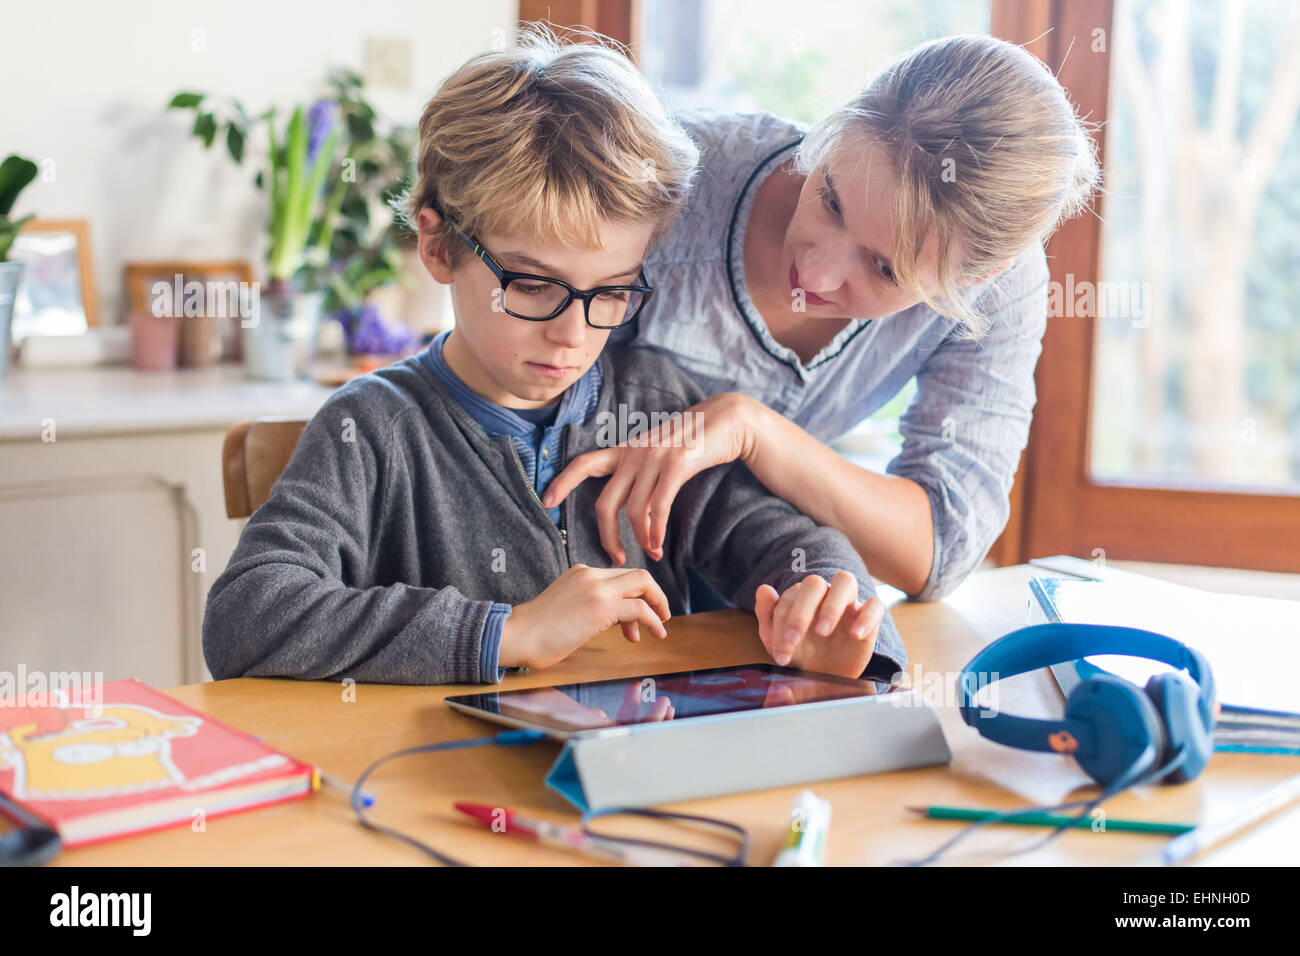 8 year old boy using tablet computer. Stock Photo